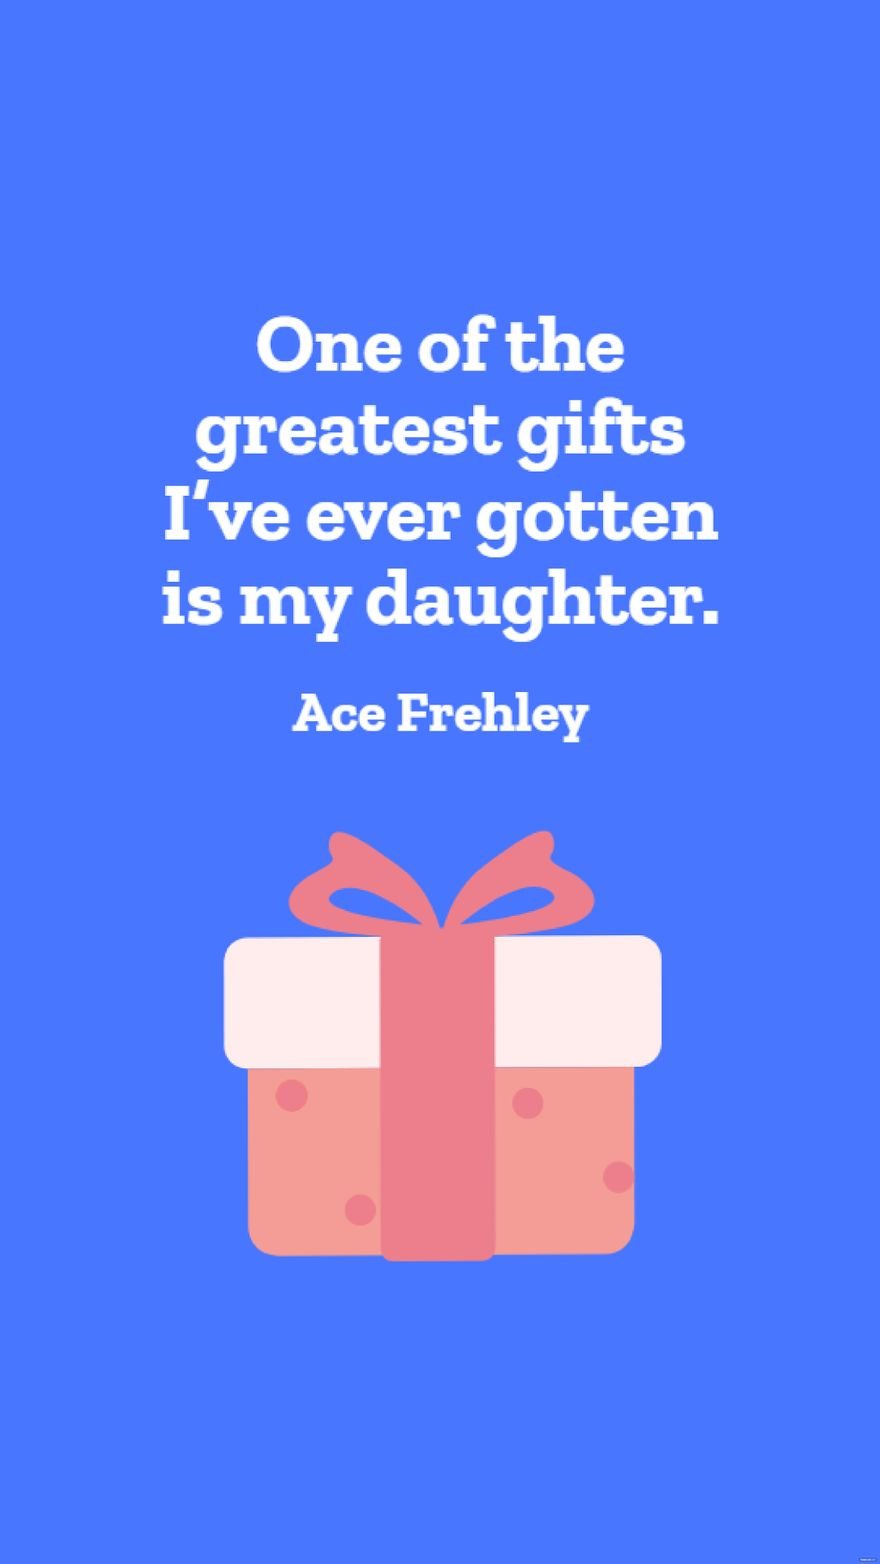 Ace Frehley - One of the greatest gifts I’ve ever gotten is my daughter. in JPG